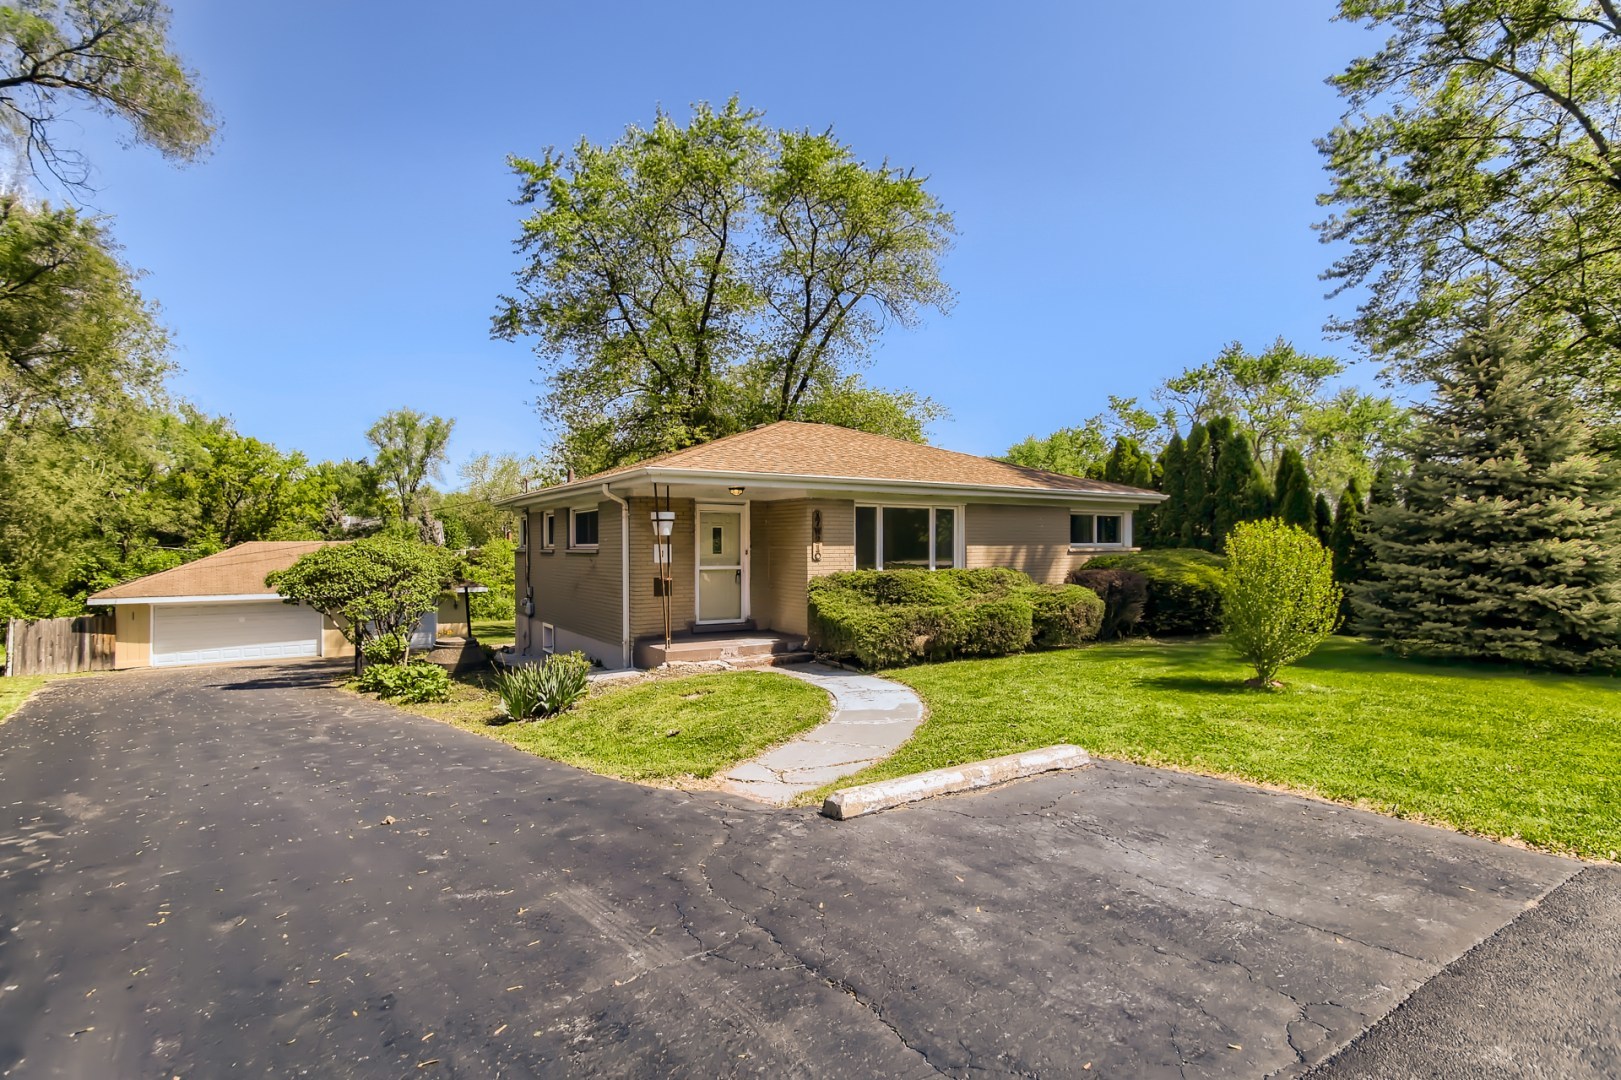 17W210 Orchard Place, Oakbrook Terrace, IL 60181 Property for sale